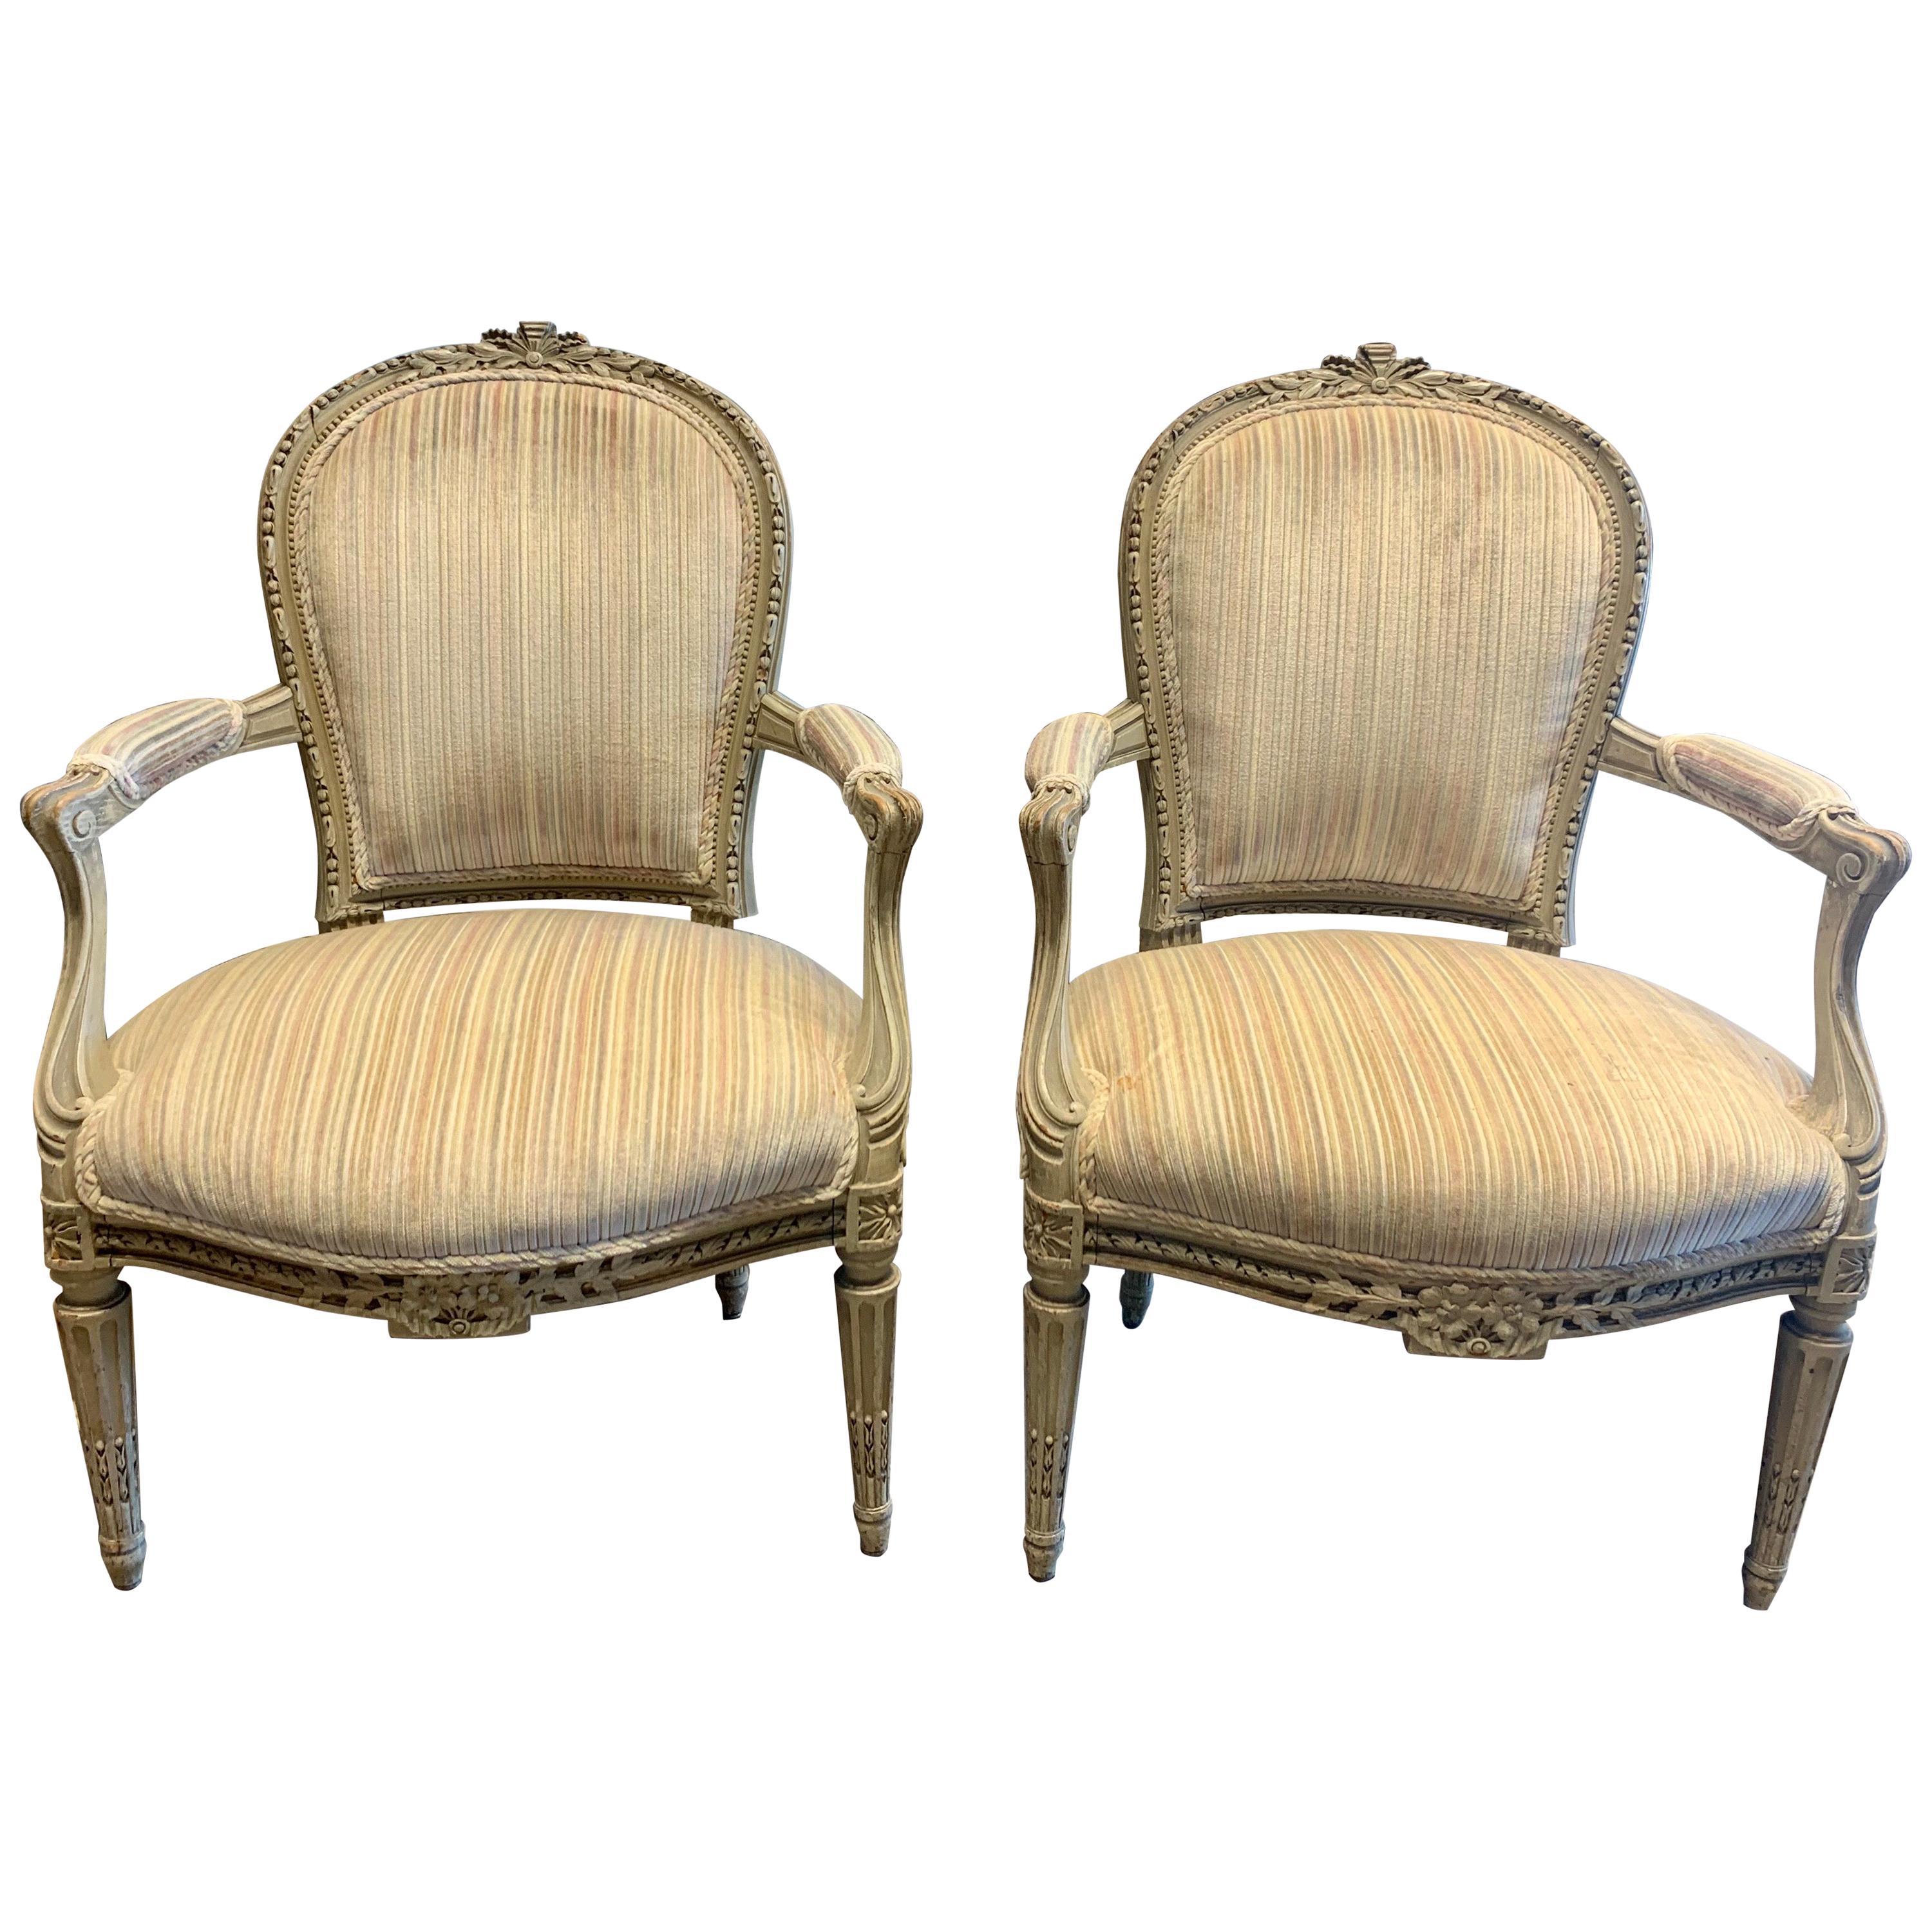 Pair of 19th Century French Louis XVI Style Carved and Painted Armchairs